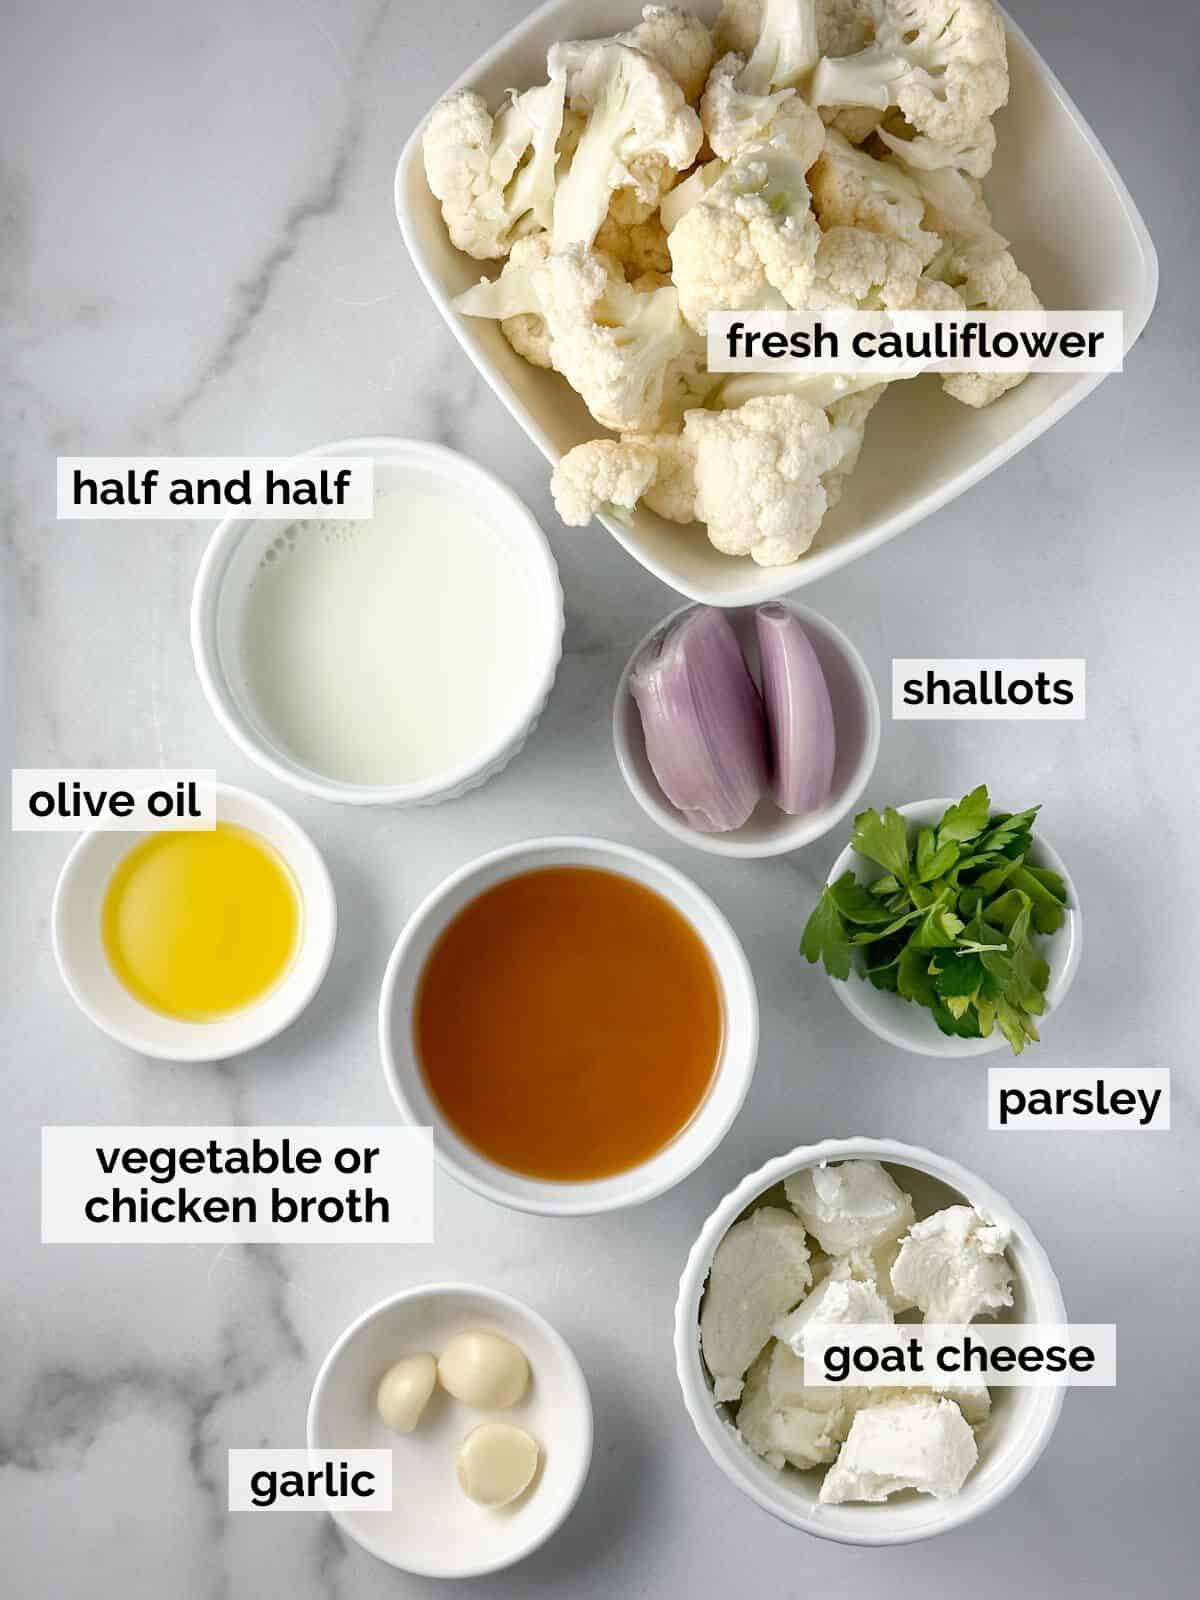 Ingredients for cauliflower in a goat cheese sauce on a marble background.